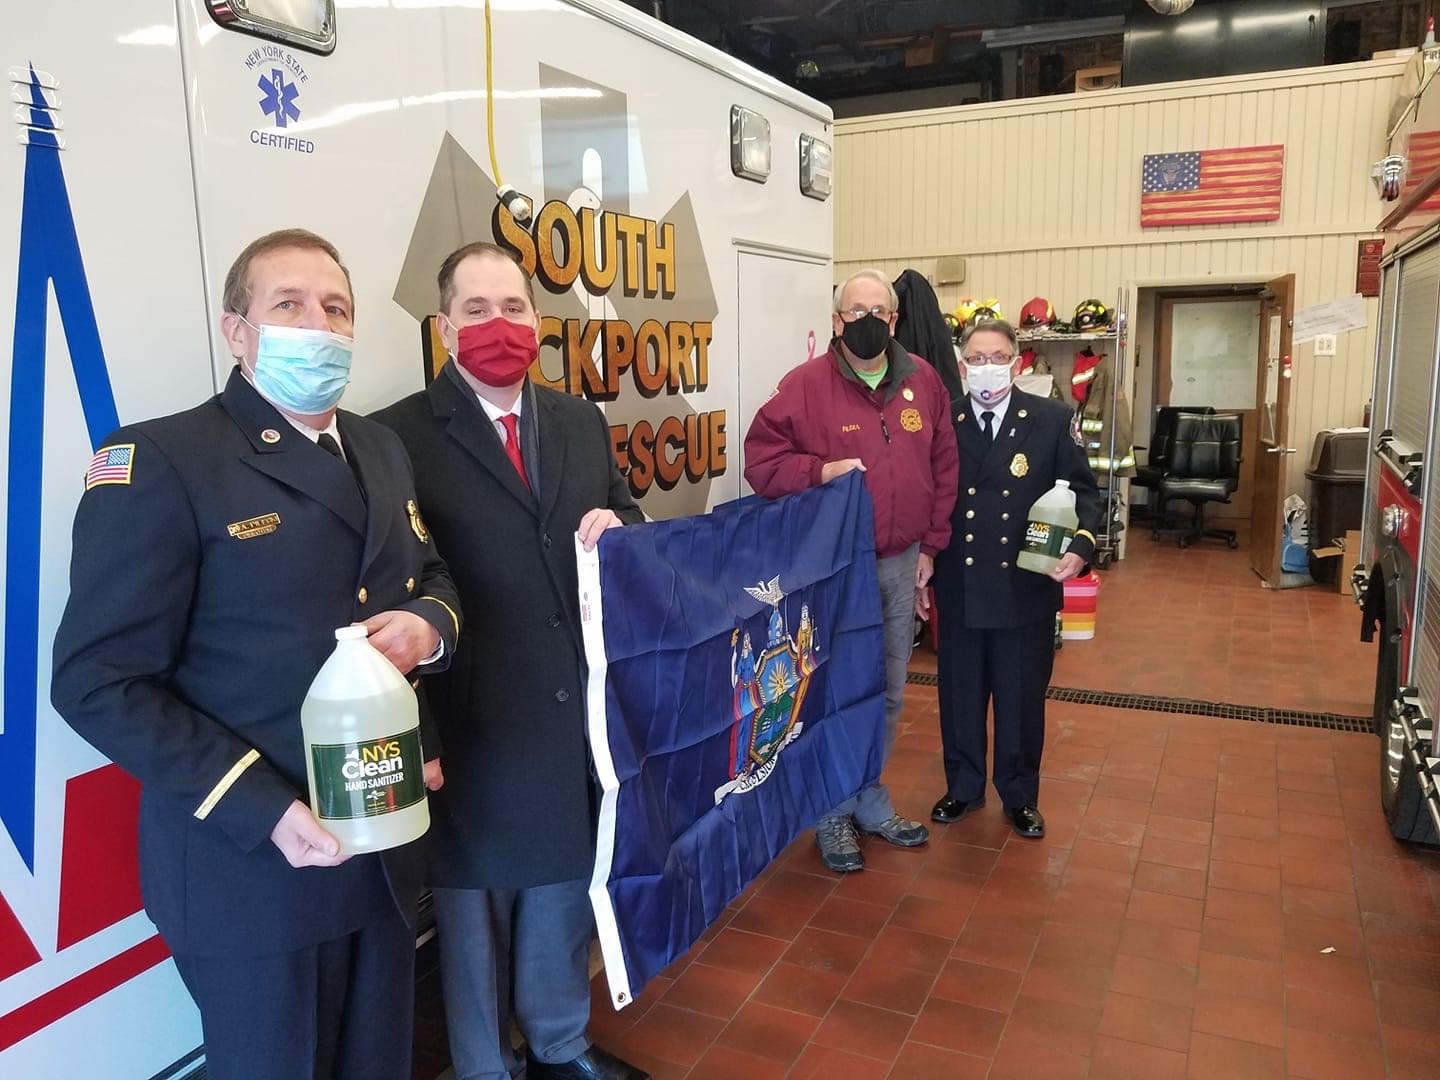 Christmas came a little early this year and I was happy to drop off some hand sanitizer and an official New York State flag to the South Lockport Volunteer Fire Company. Thank you to the Firemen's Ass